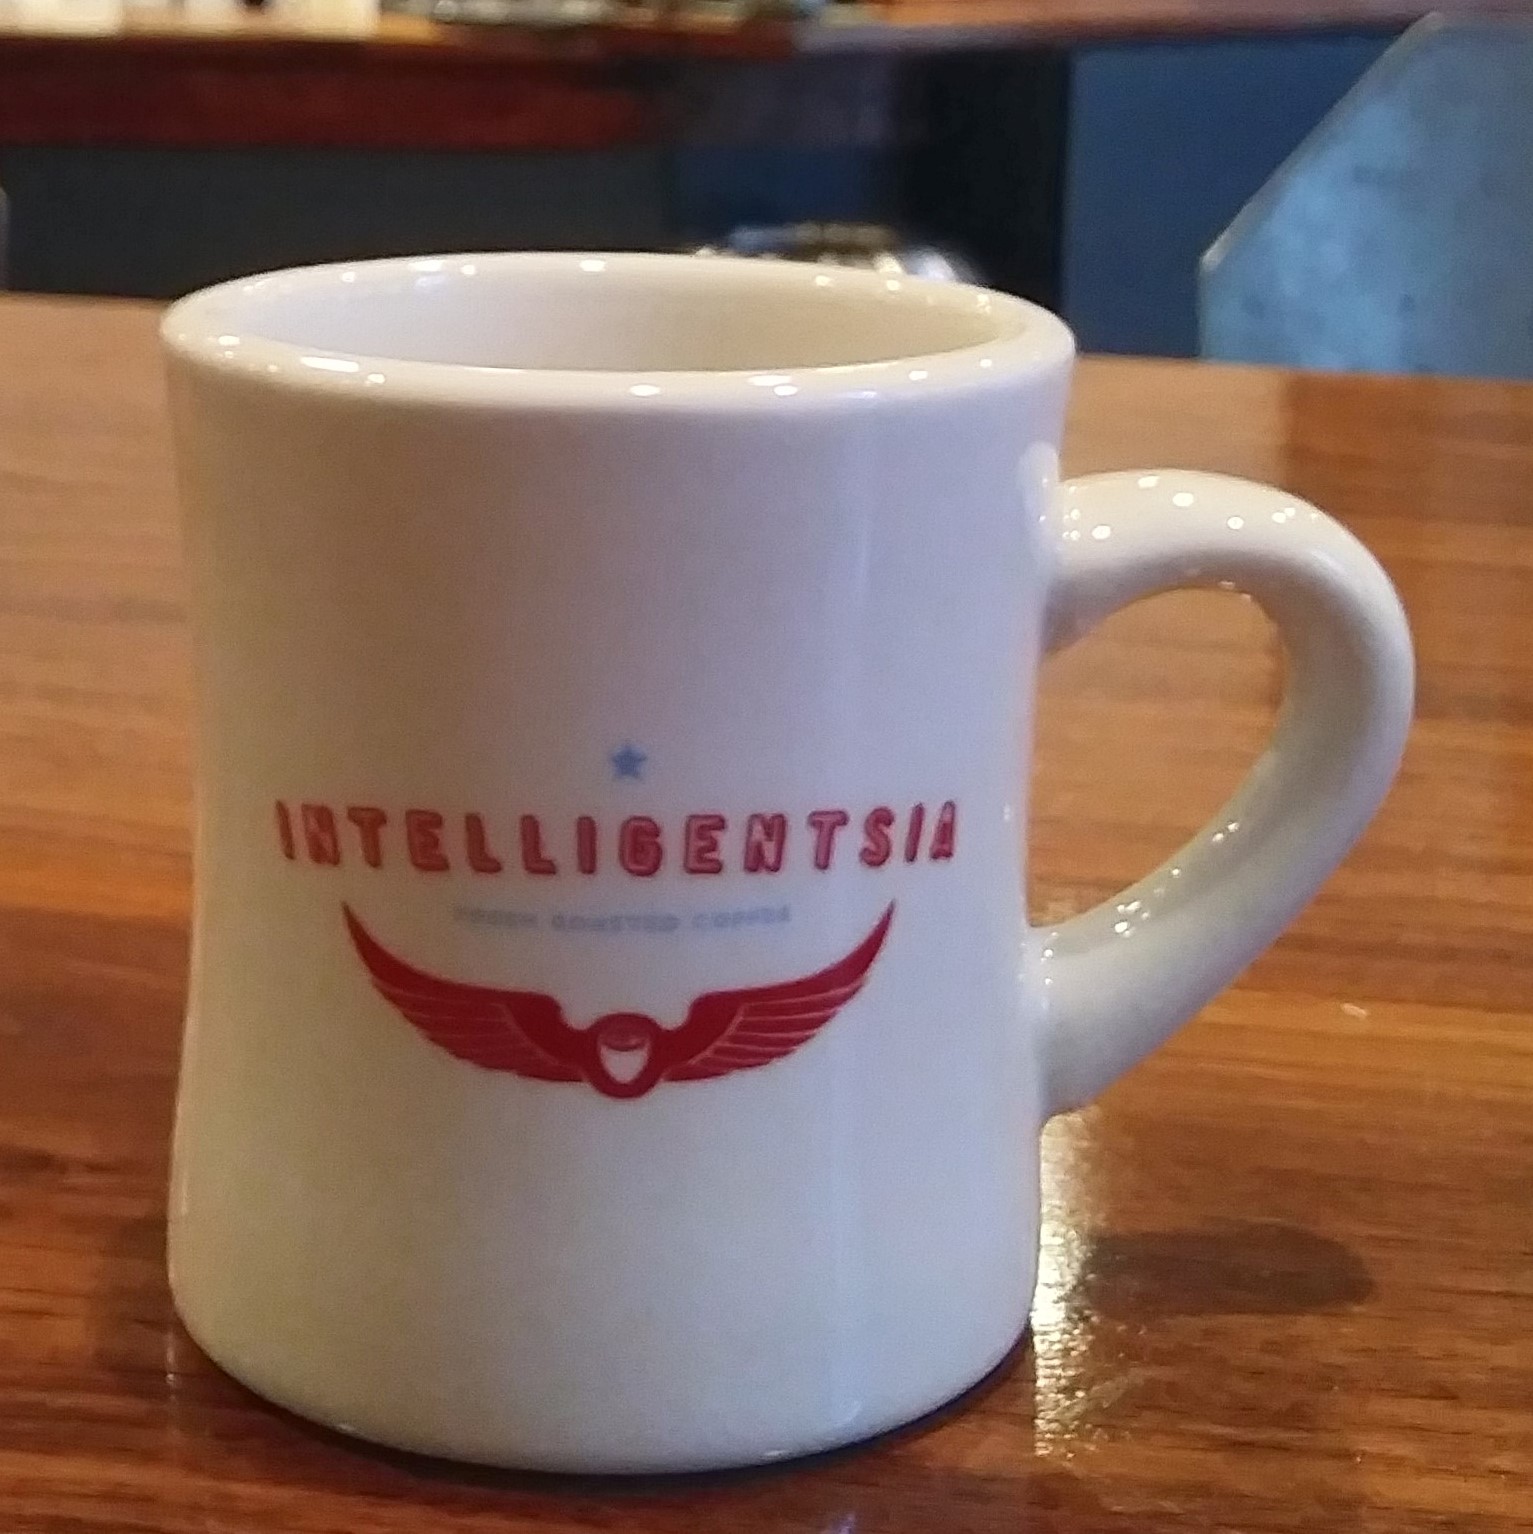 A classic, Intelligentsia diner mug from my visit to the Millennium Park coffee bar.